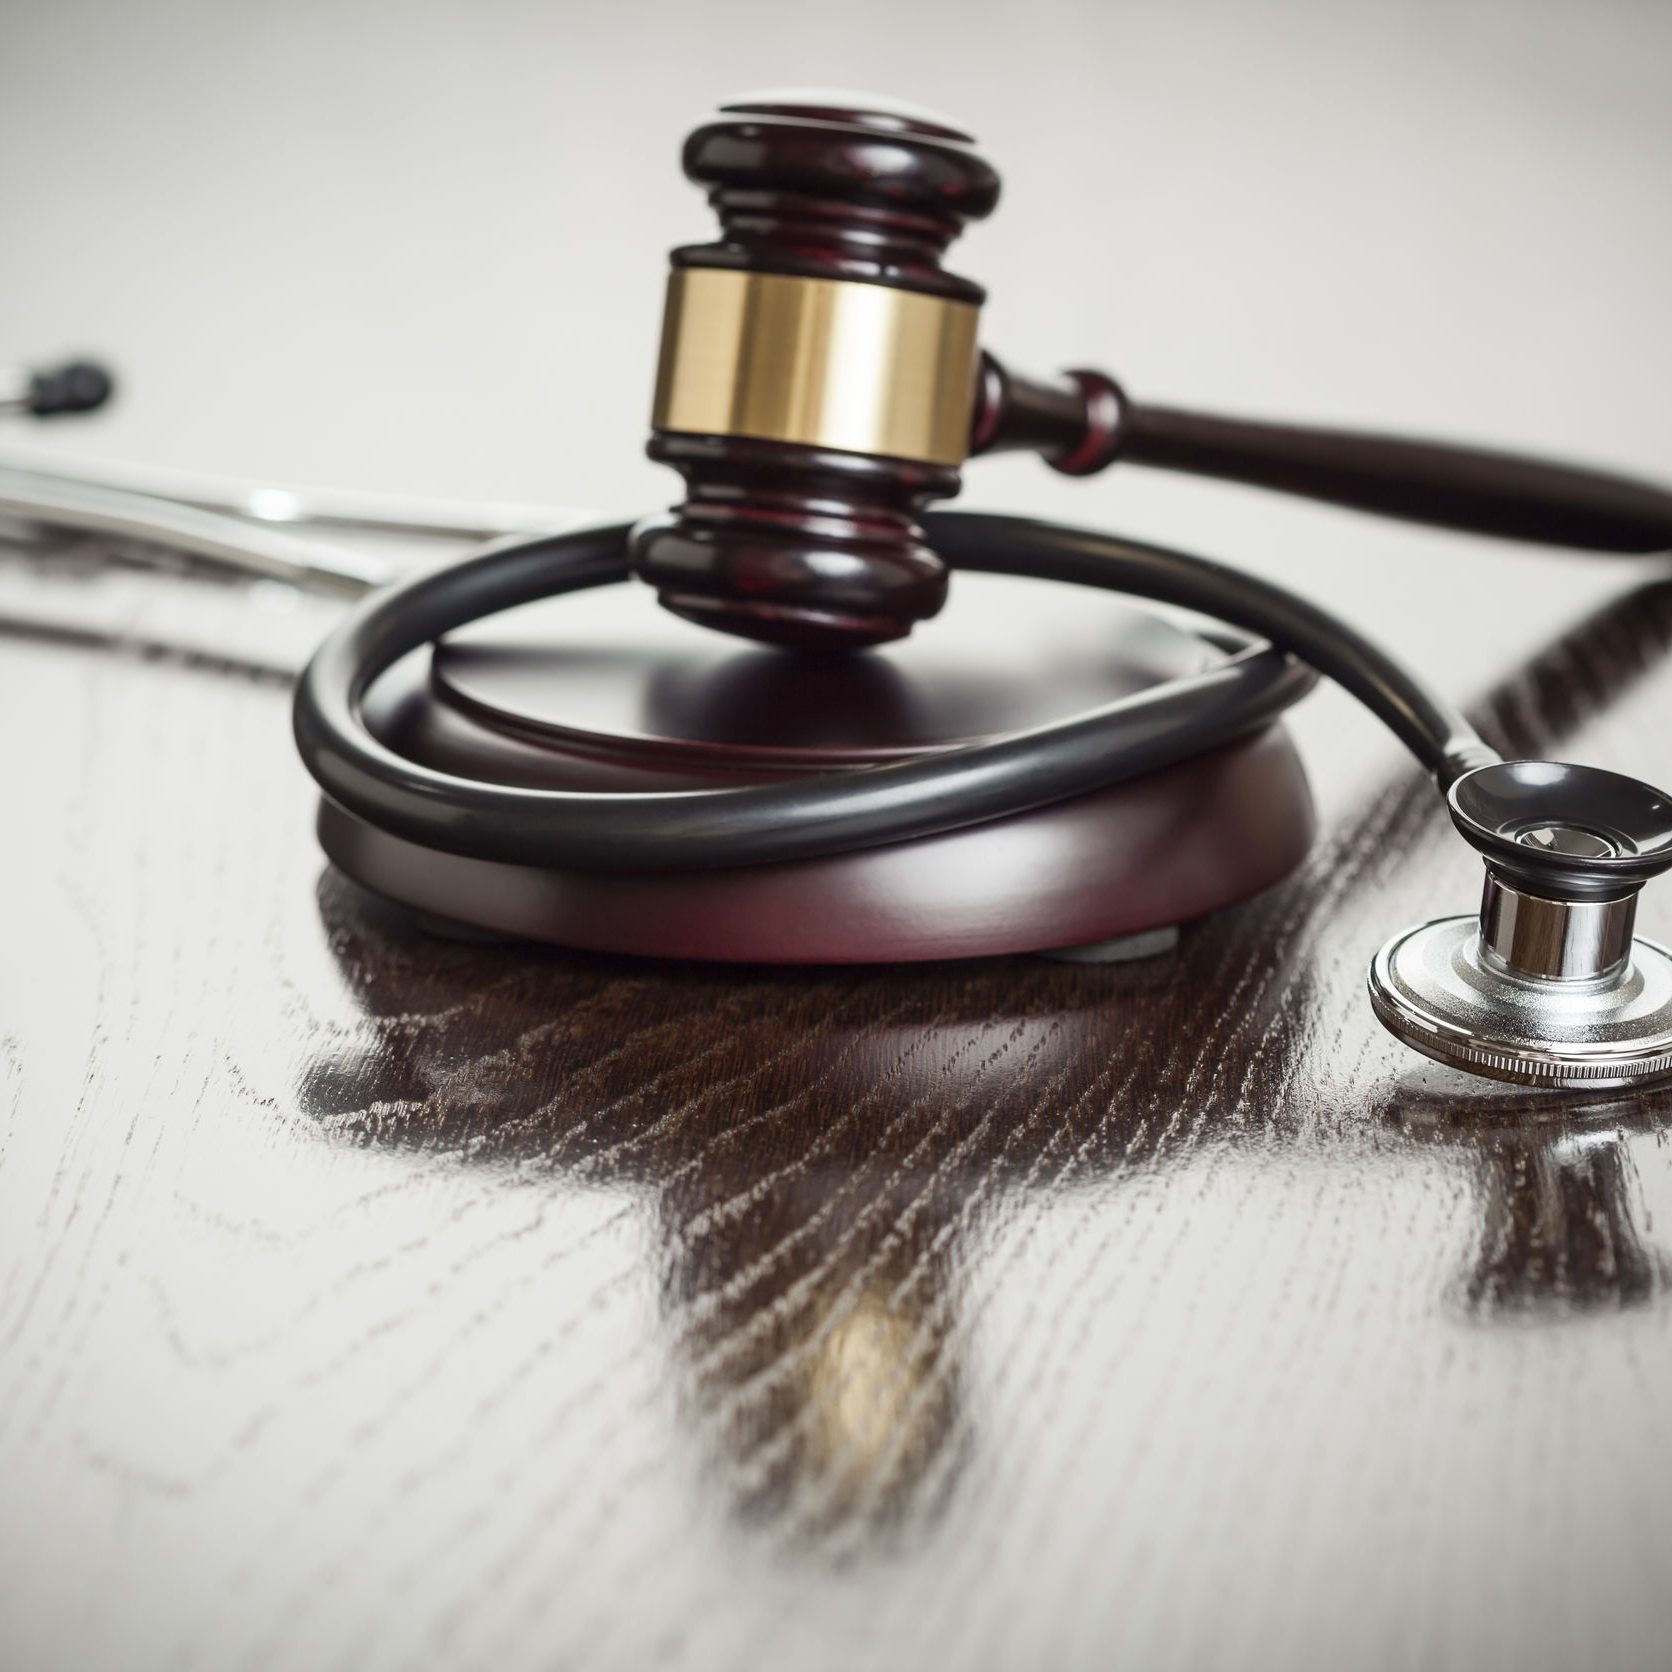 Gavel and Stethoscope on a Table